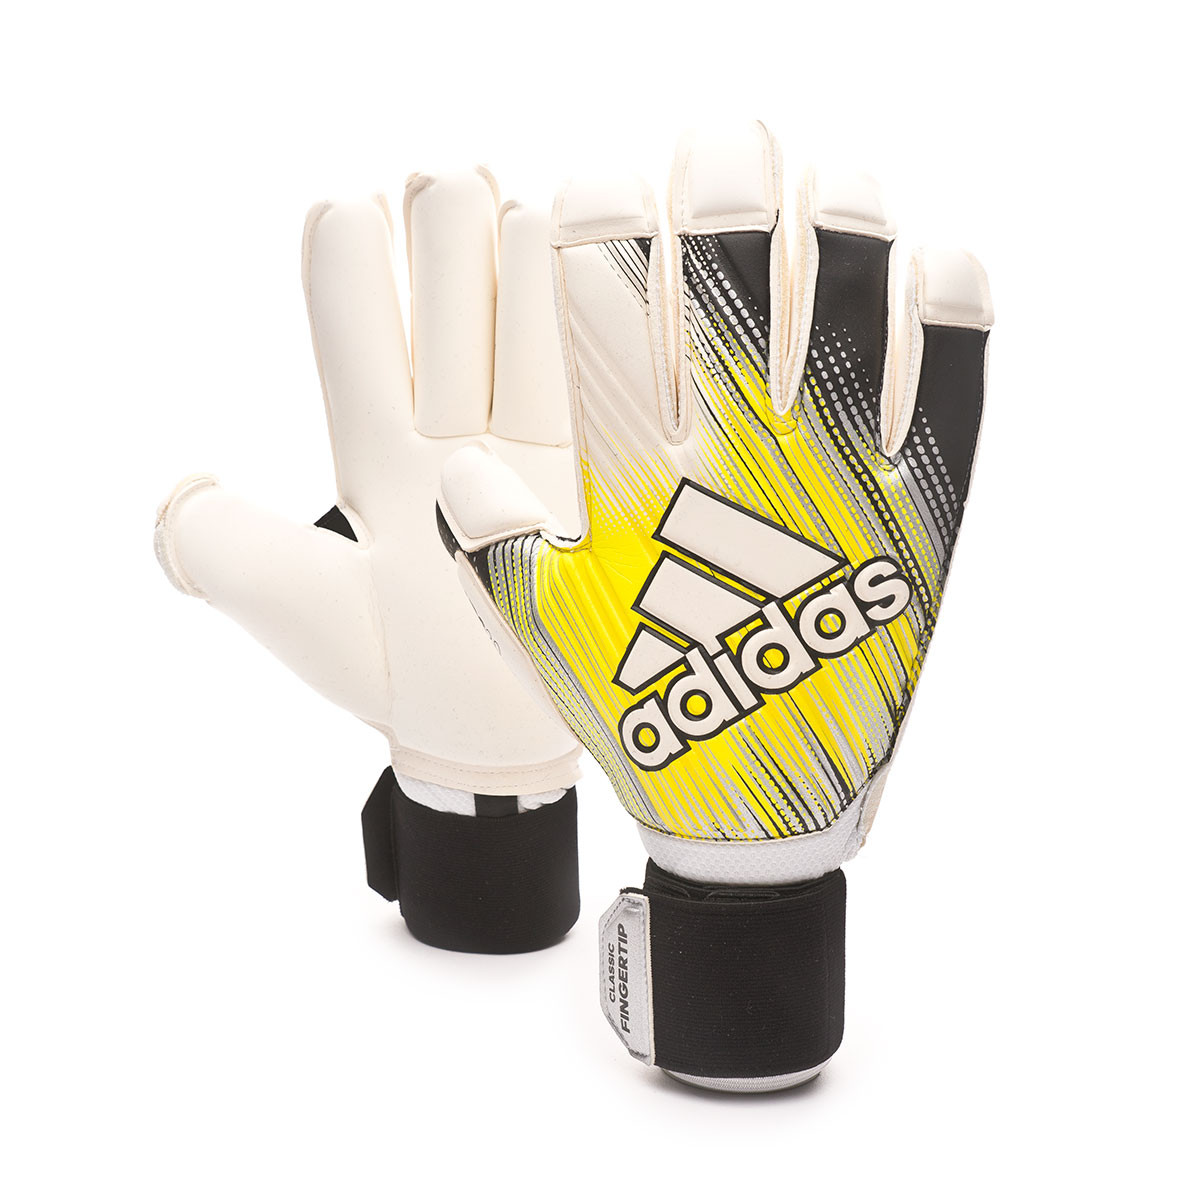 Adidas Classic Gloves Sellers, SAVE 44% -